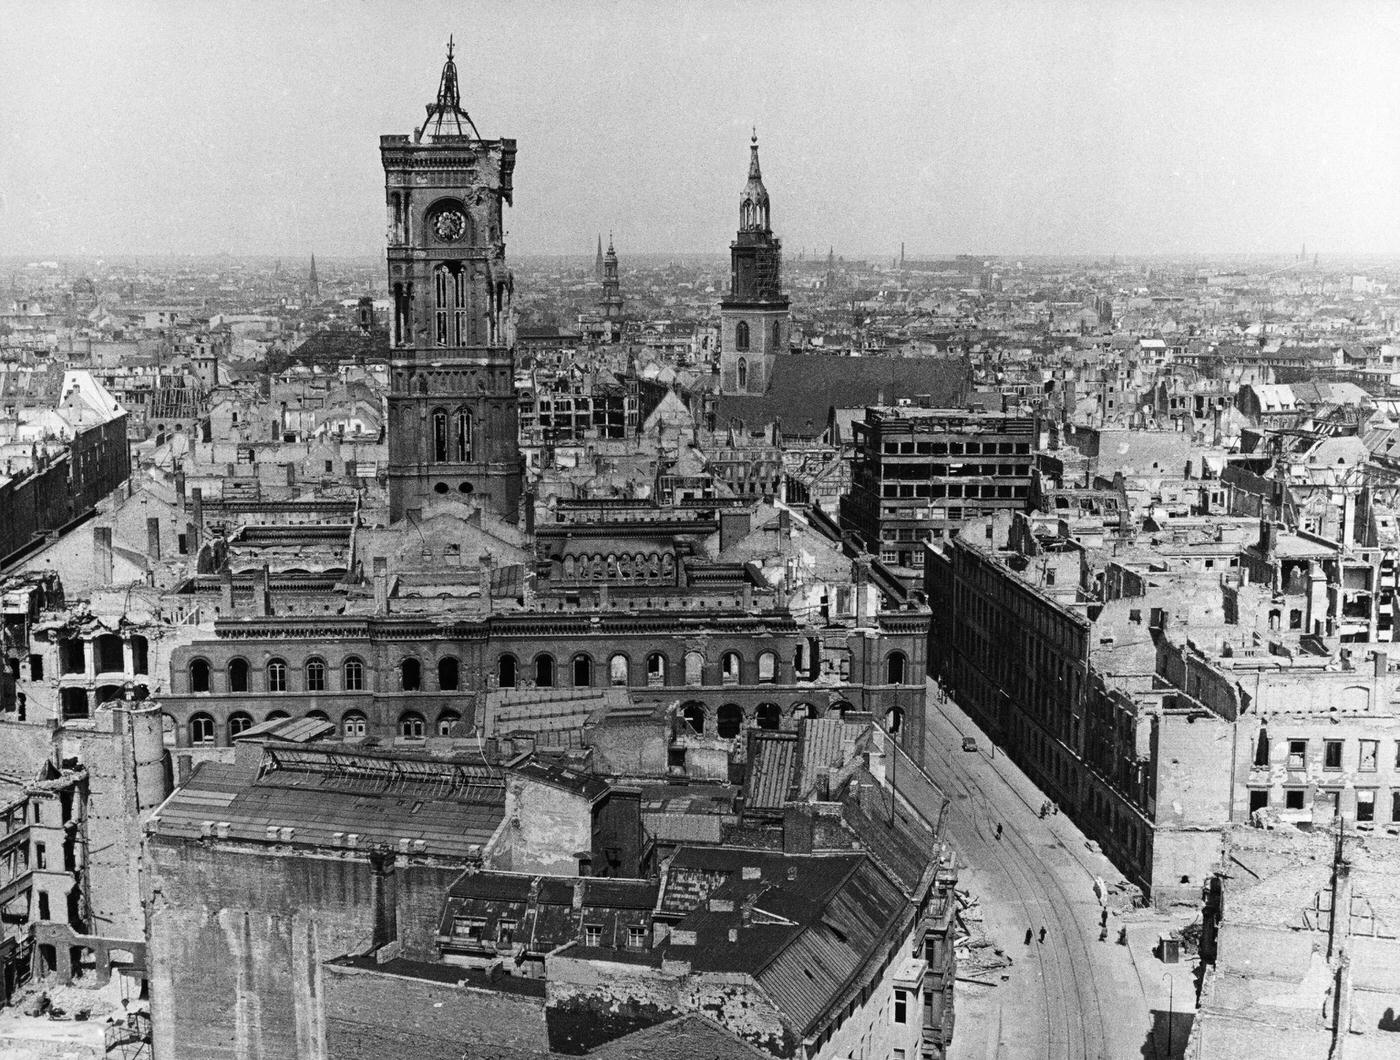 Berlin's red city hall showing severe bomb damage, Berlin, Germany, 1945.